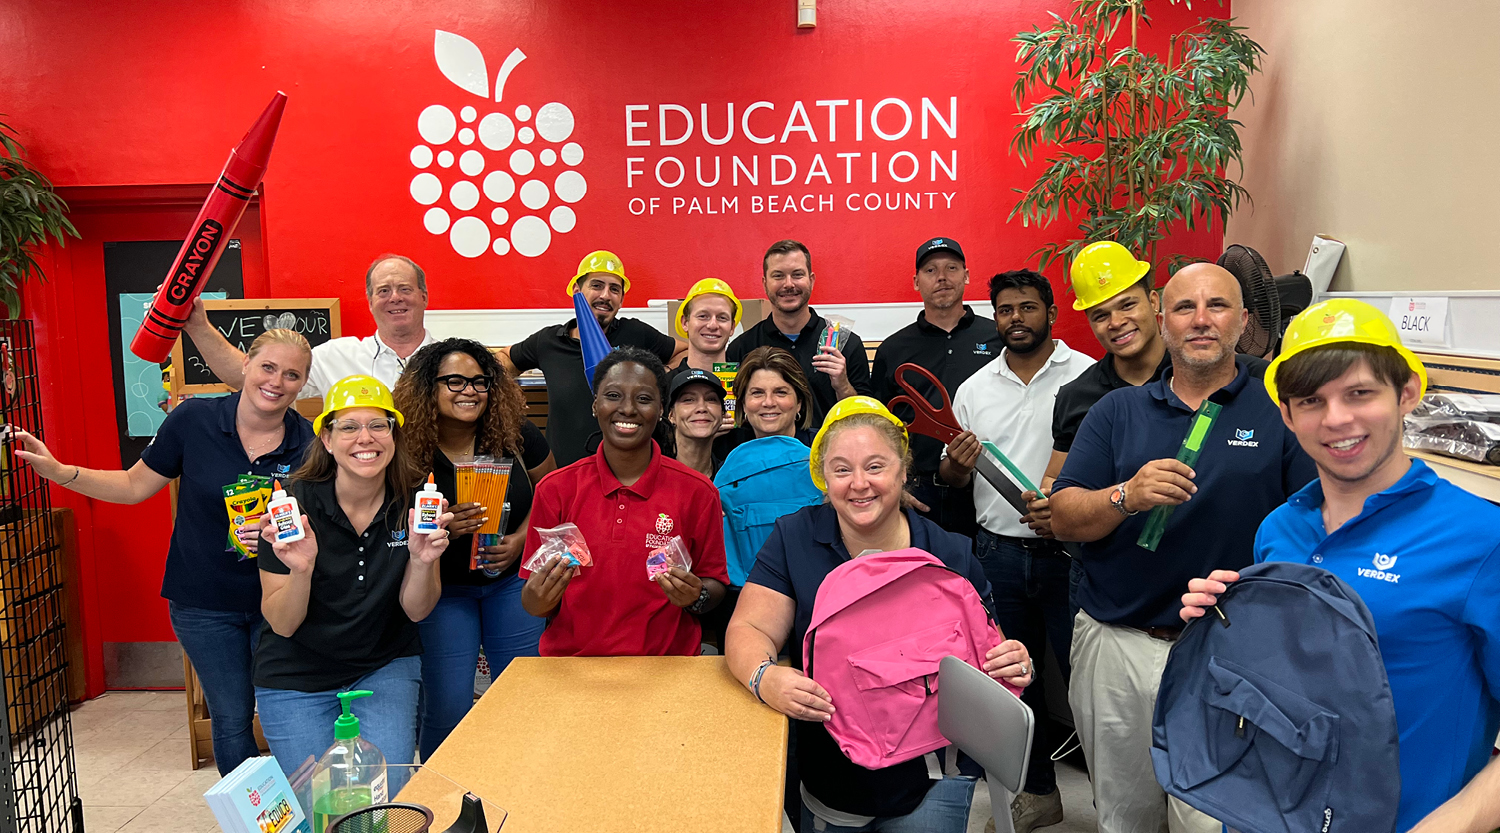 Education Foundation of Palm Beach County 2022 Volunteer Event